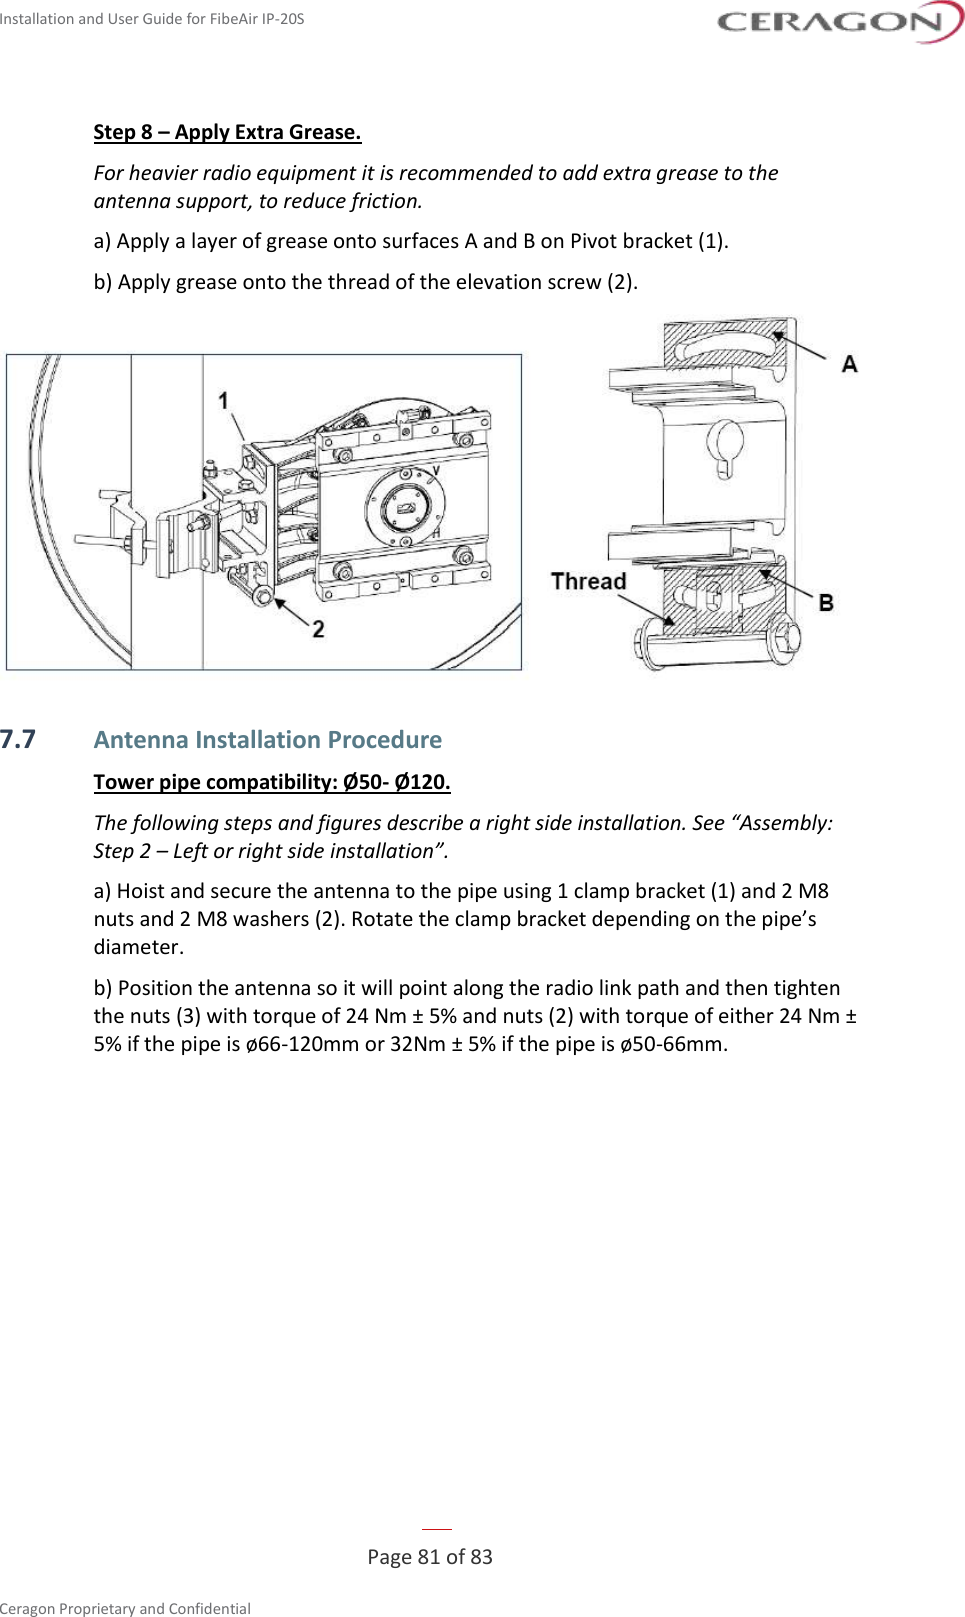 Installation and User Guide for FibeAir IP-20S   Page 81 of 83  Ceragon Proprietary and Confidential     Step 8 – Apply Extra Grease. For heavier radio equipment it is recommended to add extra grease to the antenna support, to reduce friction. a) Apply a layer of grease onto surfaces A and B on Pivot bracket (1). b) Apply grease onto the thread of the elevation screw (2).  7.7 Antenna Installation Procedure Tower pipe compatibility: Ø50- Ø120. The following steps and figures describe a right side installation. See “Assembly: Step 2 – Left or right side installation”. a) Hoist and secure the antenna to the pipe using 1 clamp bracket (1) and 2 M8 nuts and 2 M8 washers (2). Rotate the clamp bracket depending on the pipe’s diameter. b) Position the antenna so it will point along the radio link path and then tighten the nuts (3) with torque of 24 Nm ± 5% and nuts (2) with torque of either 24 Nm ± 5% if the pipe is ø66-120mm or 32Nm ± 5% if the pipe is ø50-66mm. 